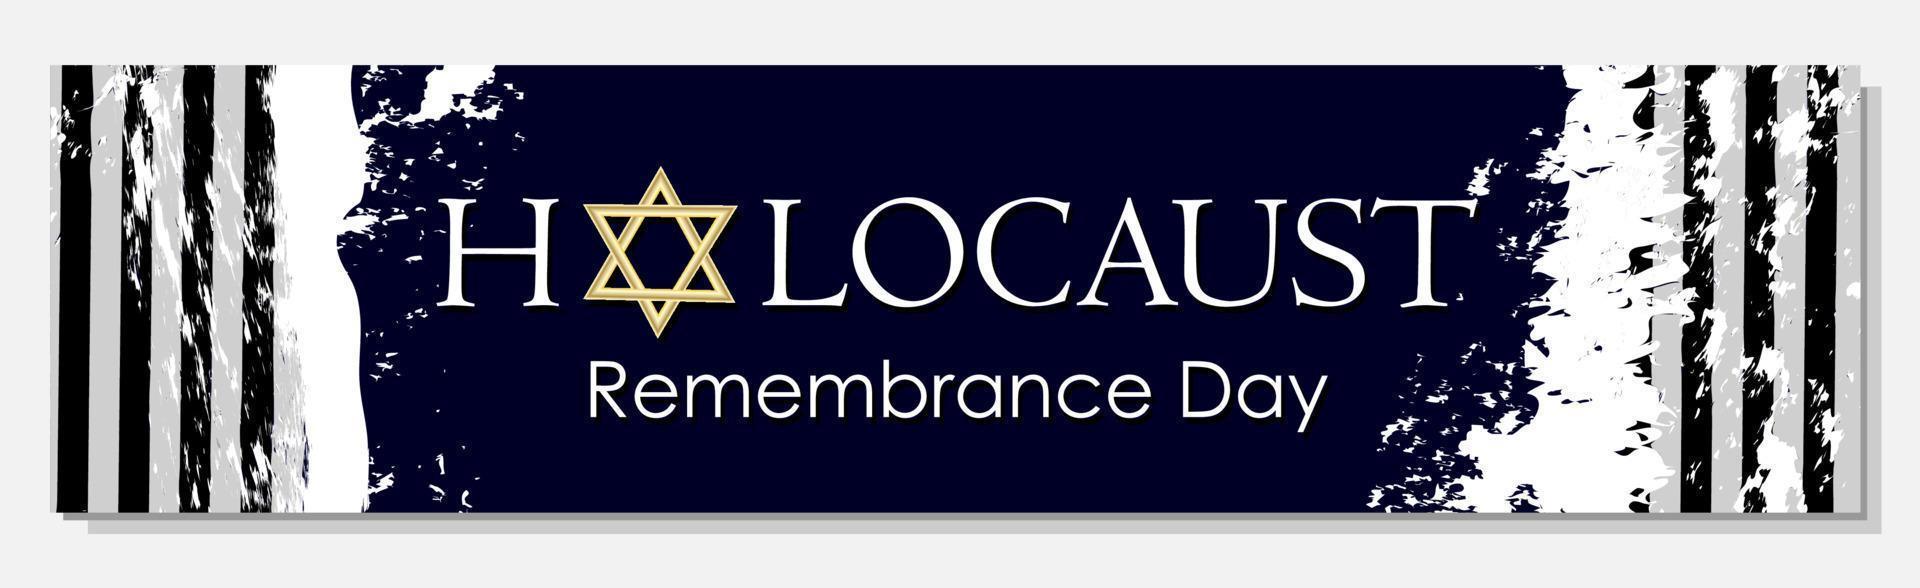 Template for Holocaust Remembrance Day. International Day of Remembrance for Victims. Holocaust Remembrance Day. Vector illustration.